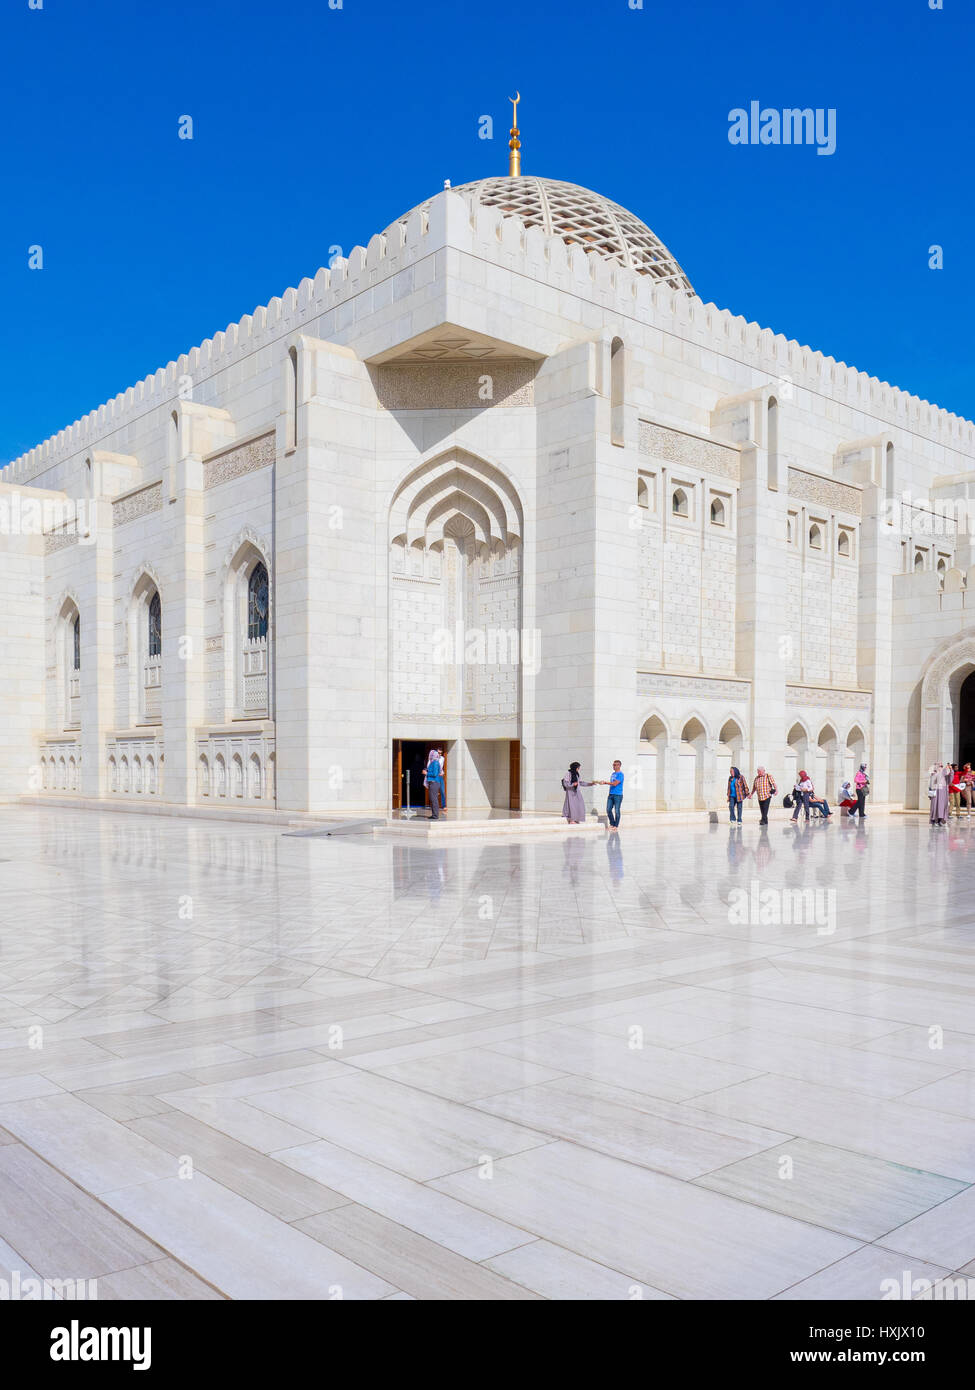 Entrance of prayer room at the Grand Mosque of Sultan Qaboos in Muscat, Oman Stock Photo